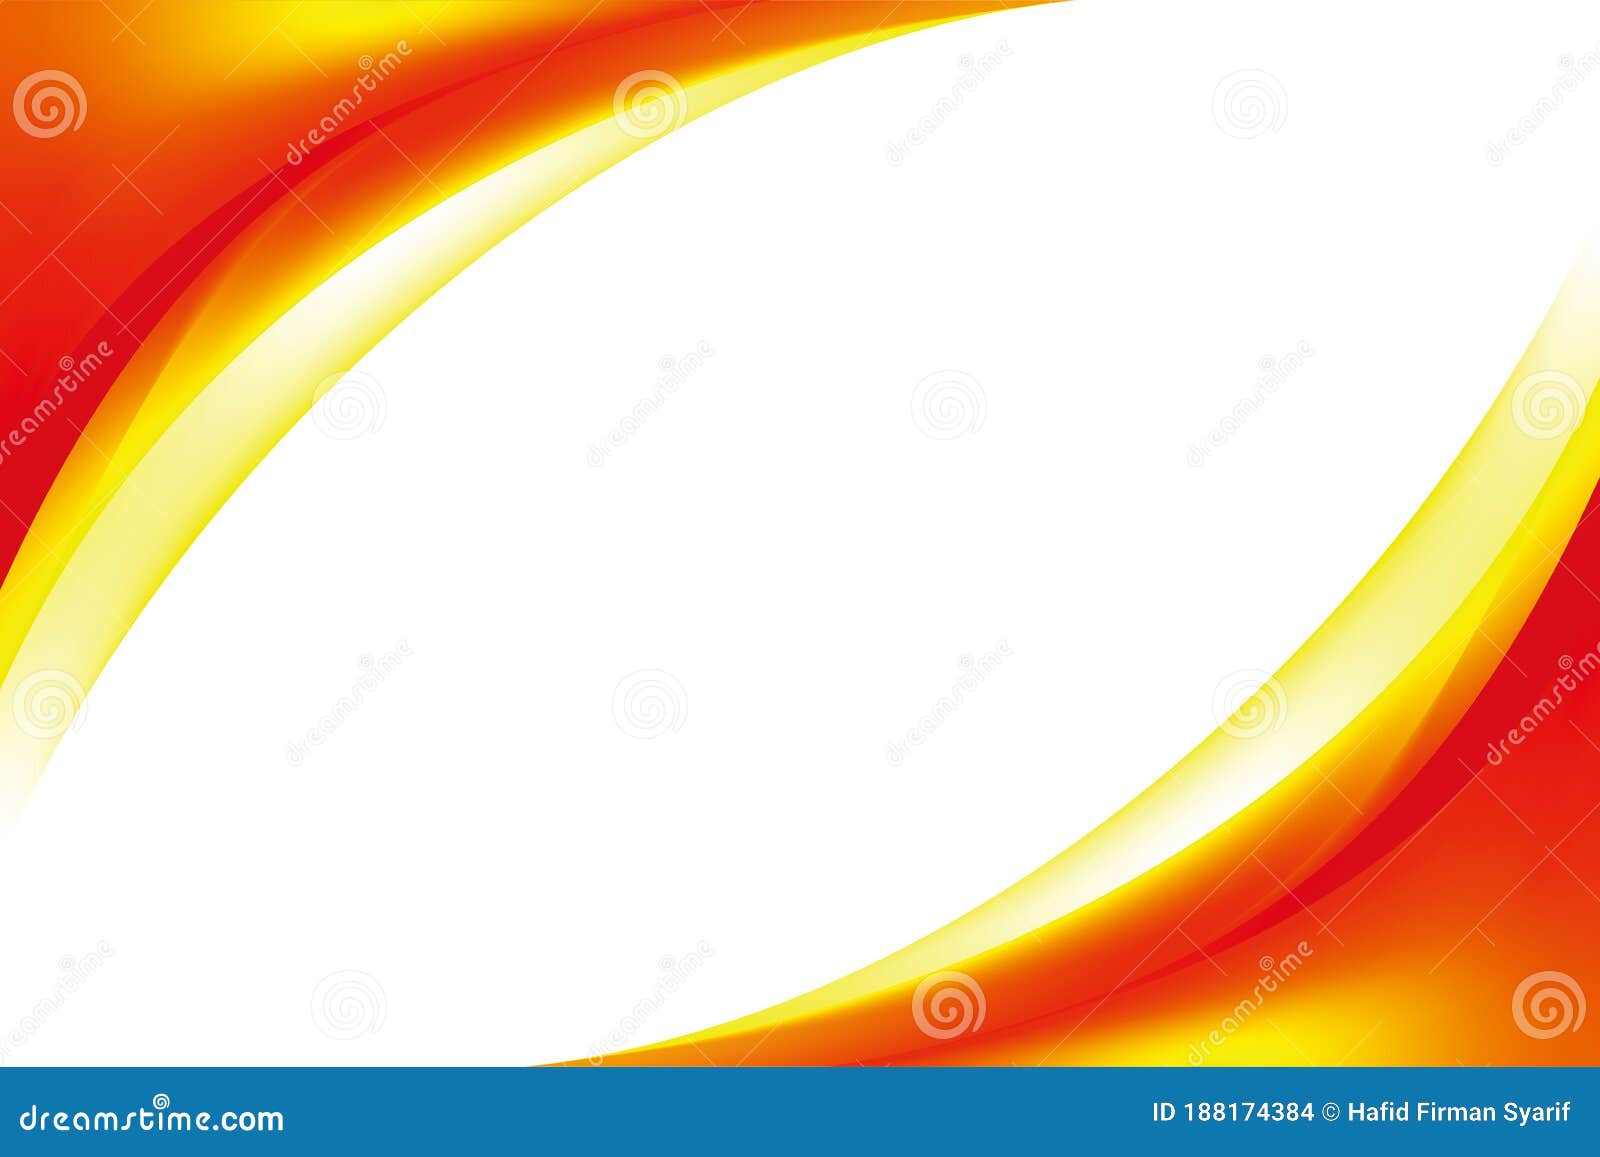 Red Yellow Wavy Background Template Vector Stock Vector - Illustration of  flowing, digital: 188174384